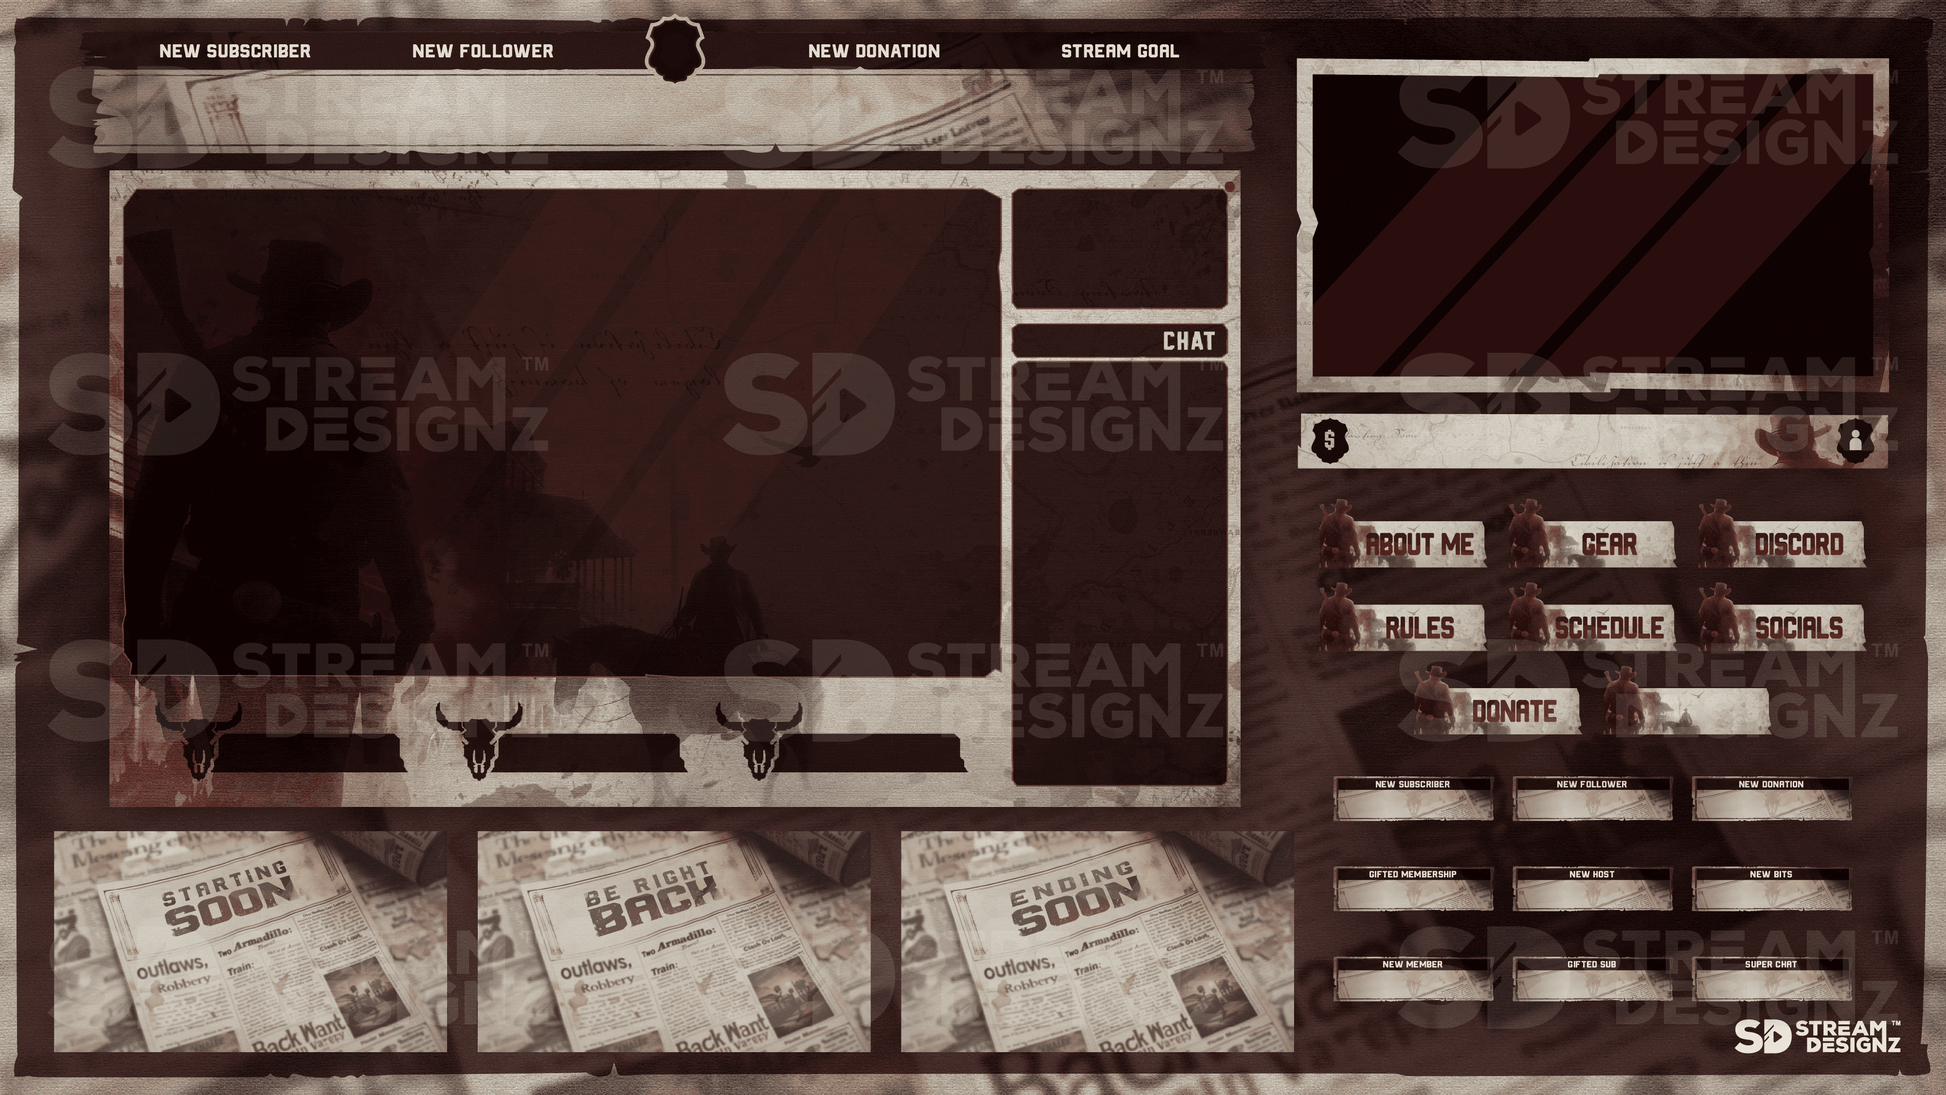 animated stream overlay package feature image outlaw stream designz